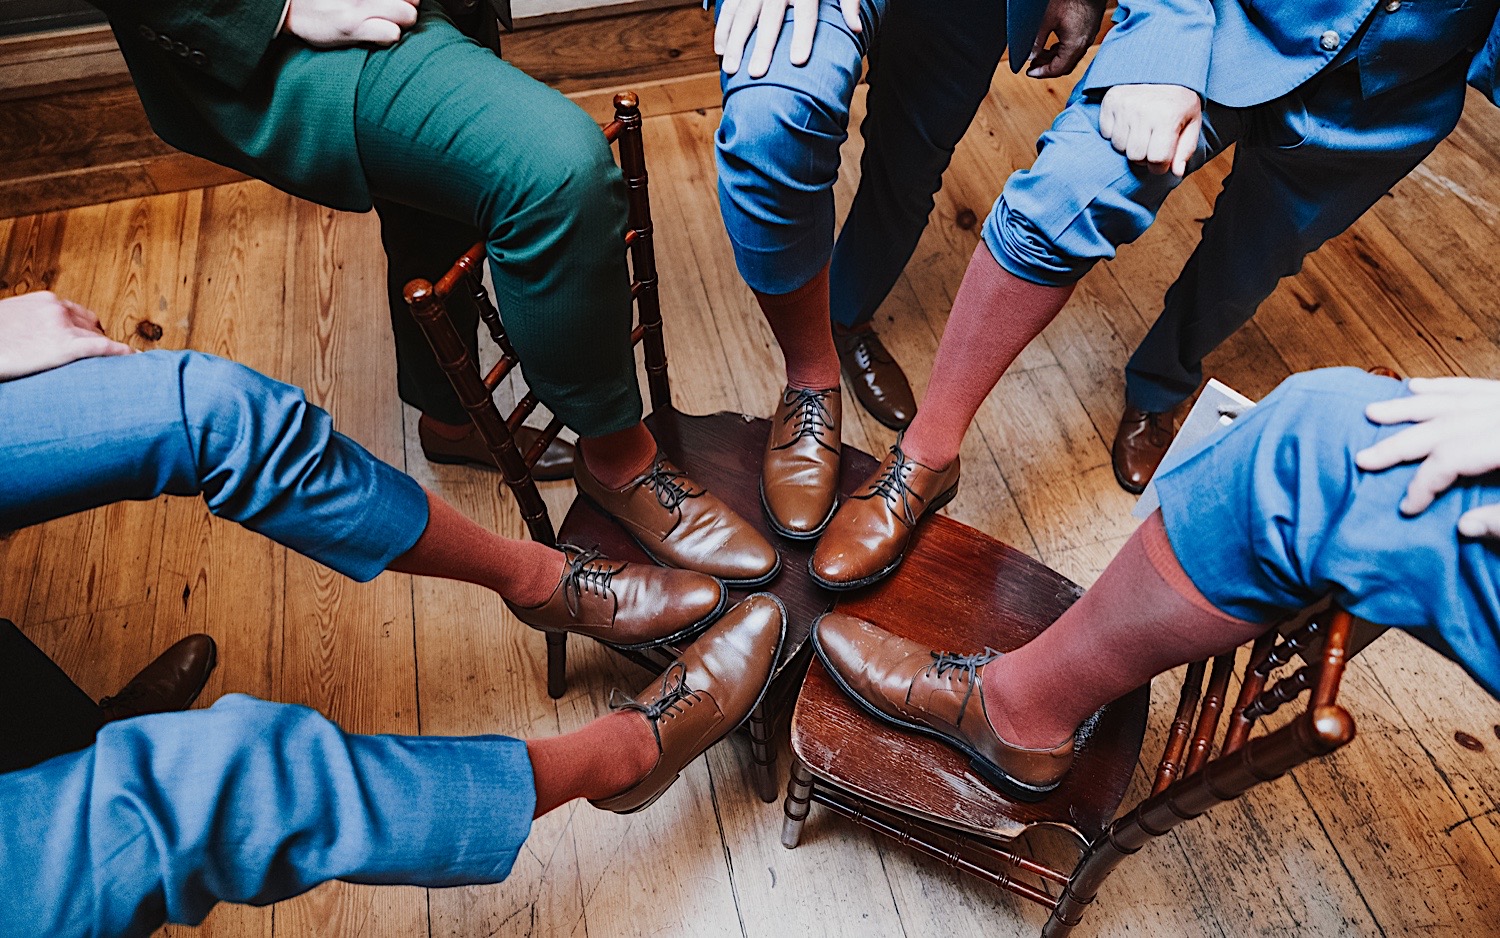 A groom and his groomsmen all put their feet up on a wooden chair to show off their matching shoes during an indoor wedding reception at Lake Bomoseen Lodge in Vermont